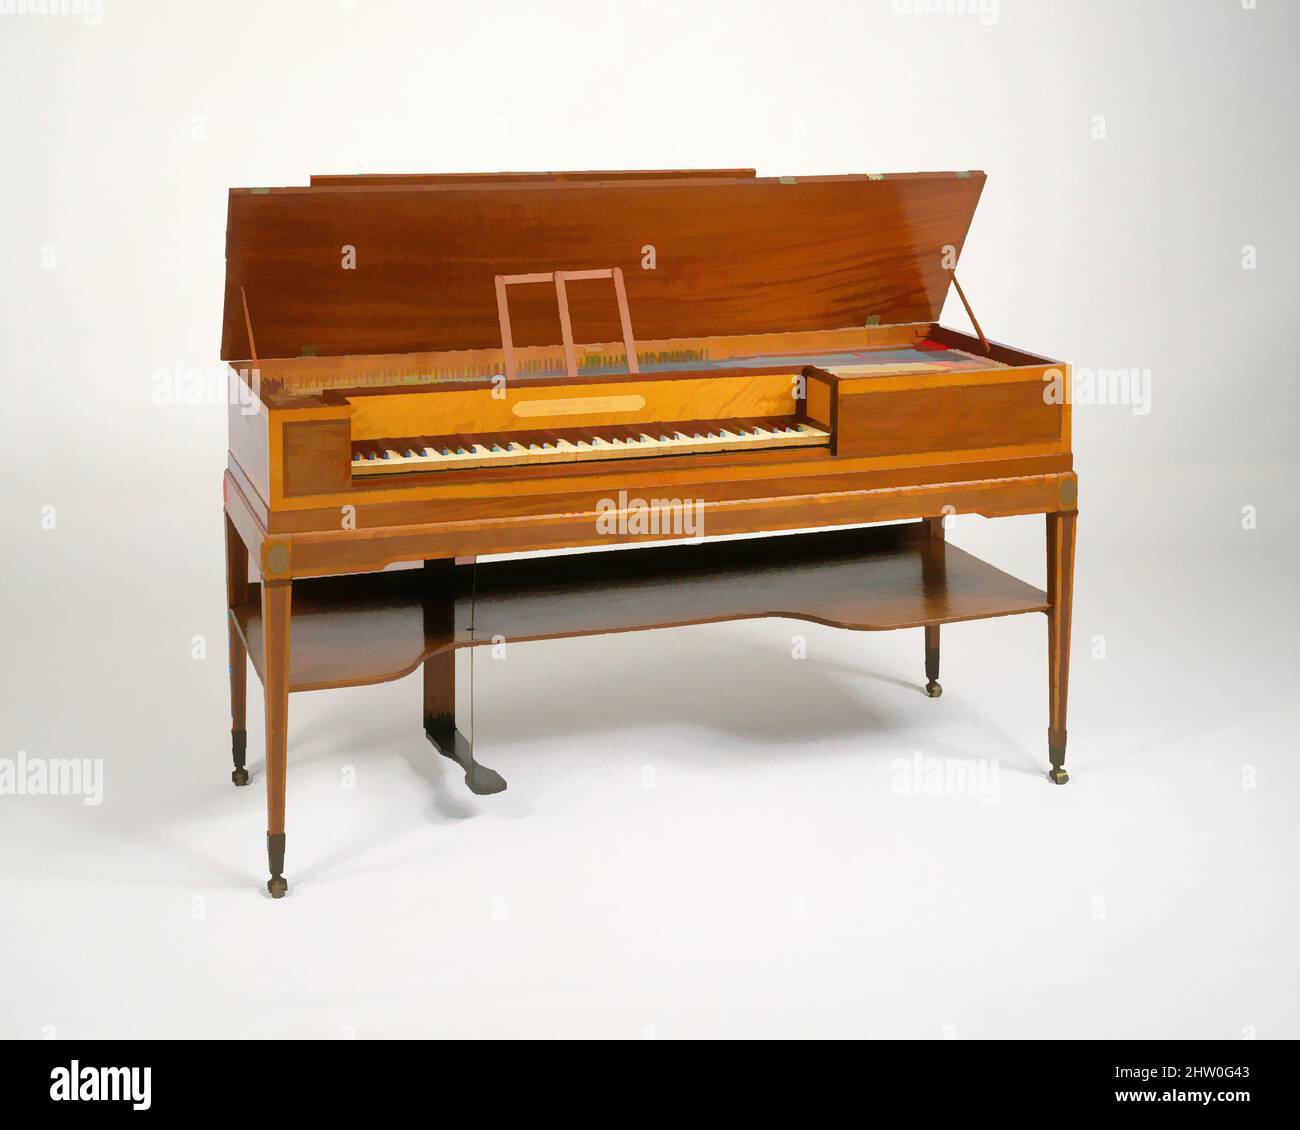 Art inspired by Square Piano, 1797, London, England, British, Mahogany veneer, boxwood, iron, brass, ivory, ebony, and various materials, Case length (perpendicular to keyboard): 57.3 cm (22 5/8 in.), Chordophone-Zither-struck-piano, John Broadwood & Sons, Based on the design of, Classic works modernized by Artotop with a splash of modernity. Shapes, color and value, eye-catching visual impact on art. Emotions through freedom of artworks in a contemporary way. A timeless message pursuing a wildly creative new direction. Artists turning to the digital medium and creating the Artotop NFT Stock Photo